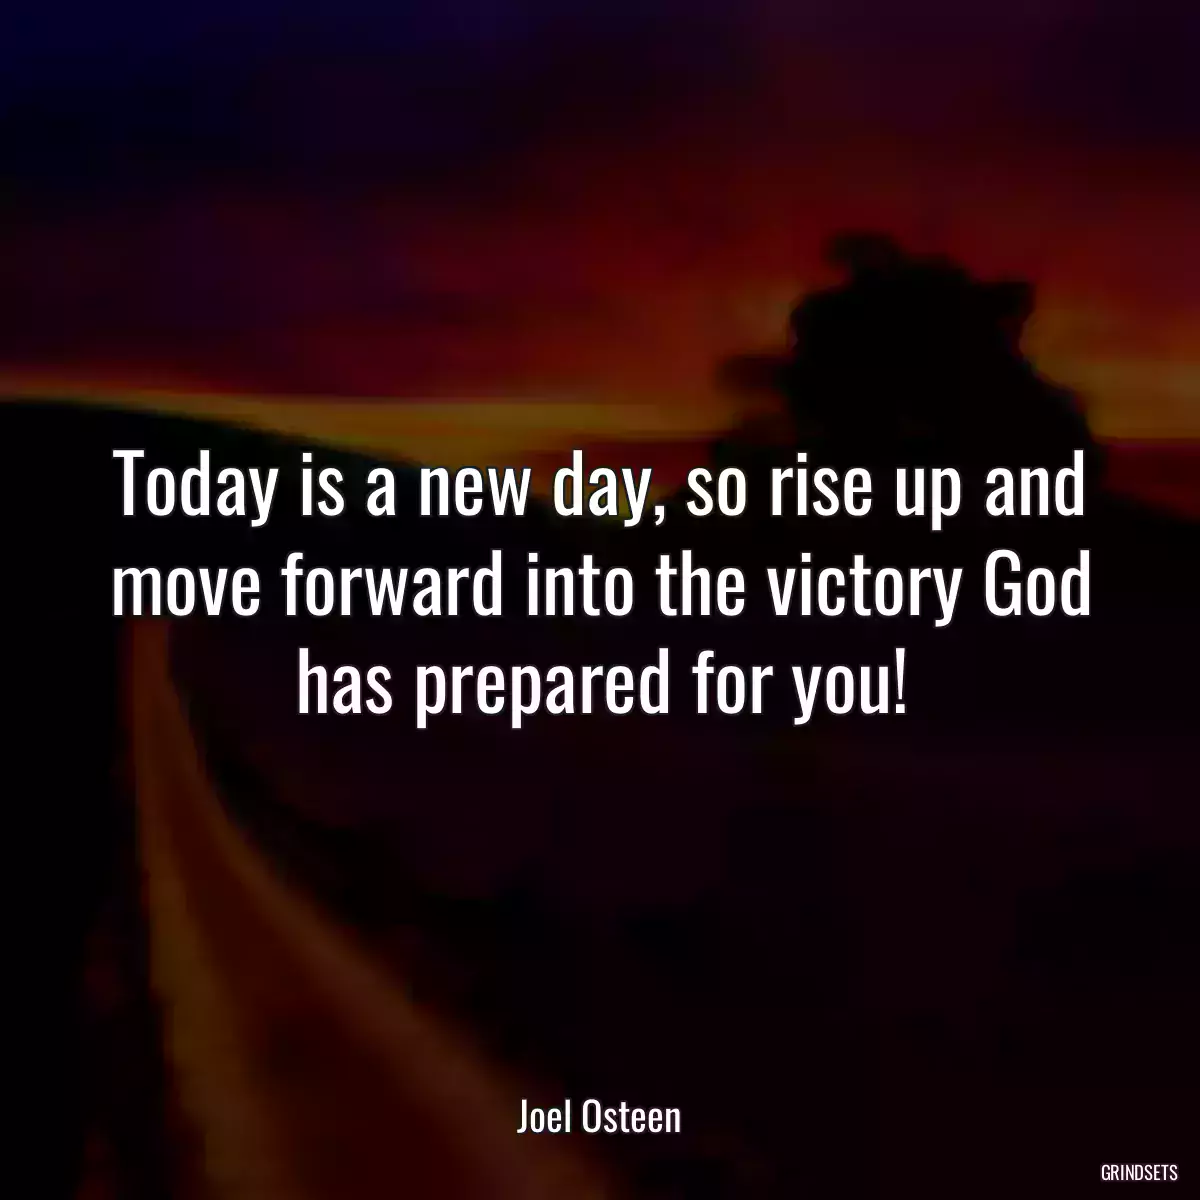 Today is a new day, so rise up and move forward into the victory God has prepared for you!